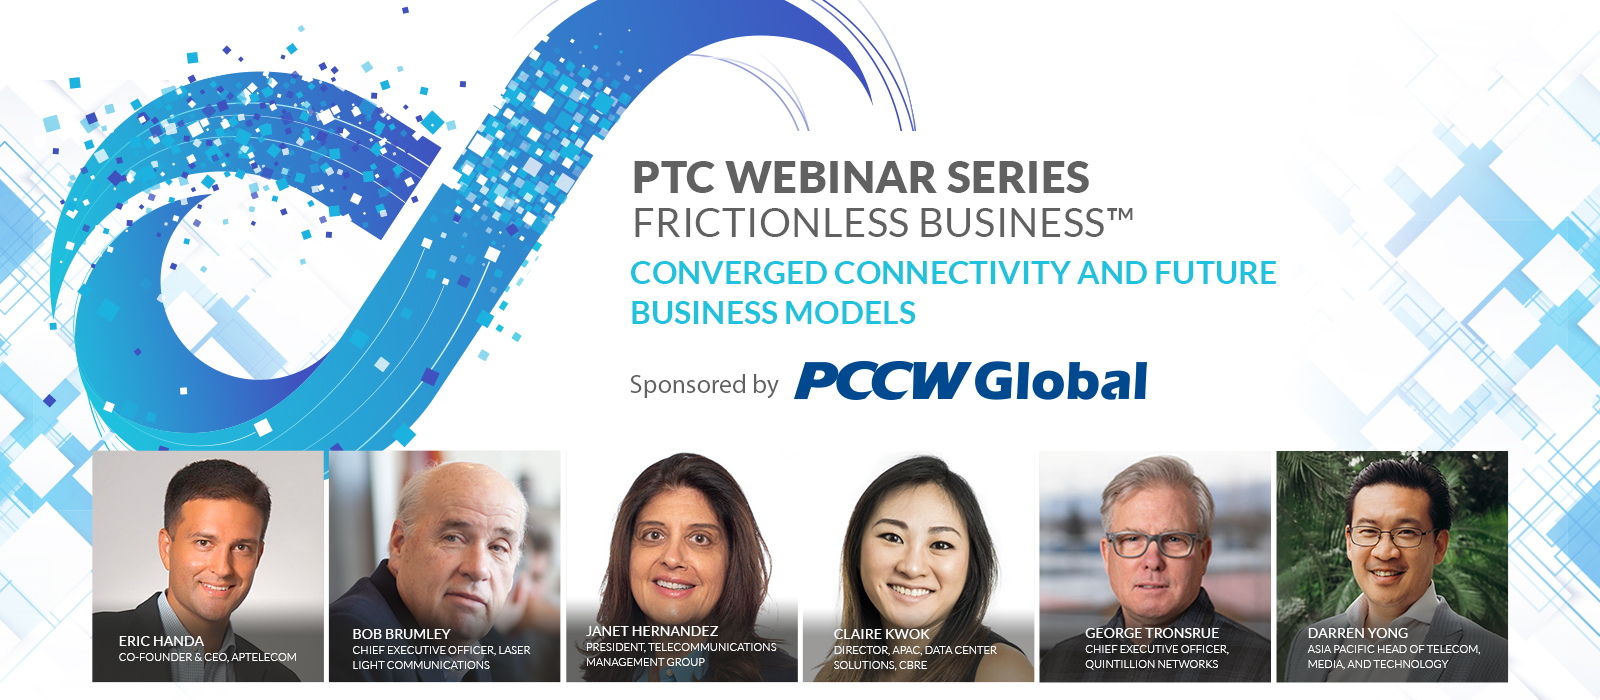 PTC Webinar Series: Frictionless Business - Converged Connectivity and Future Business Models